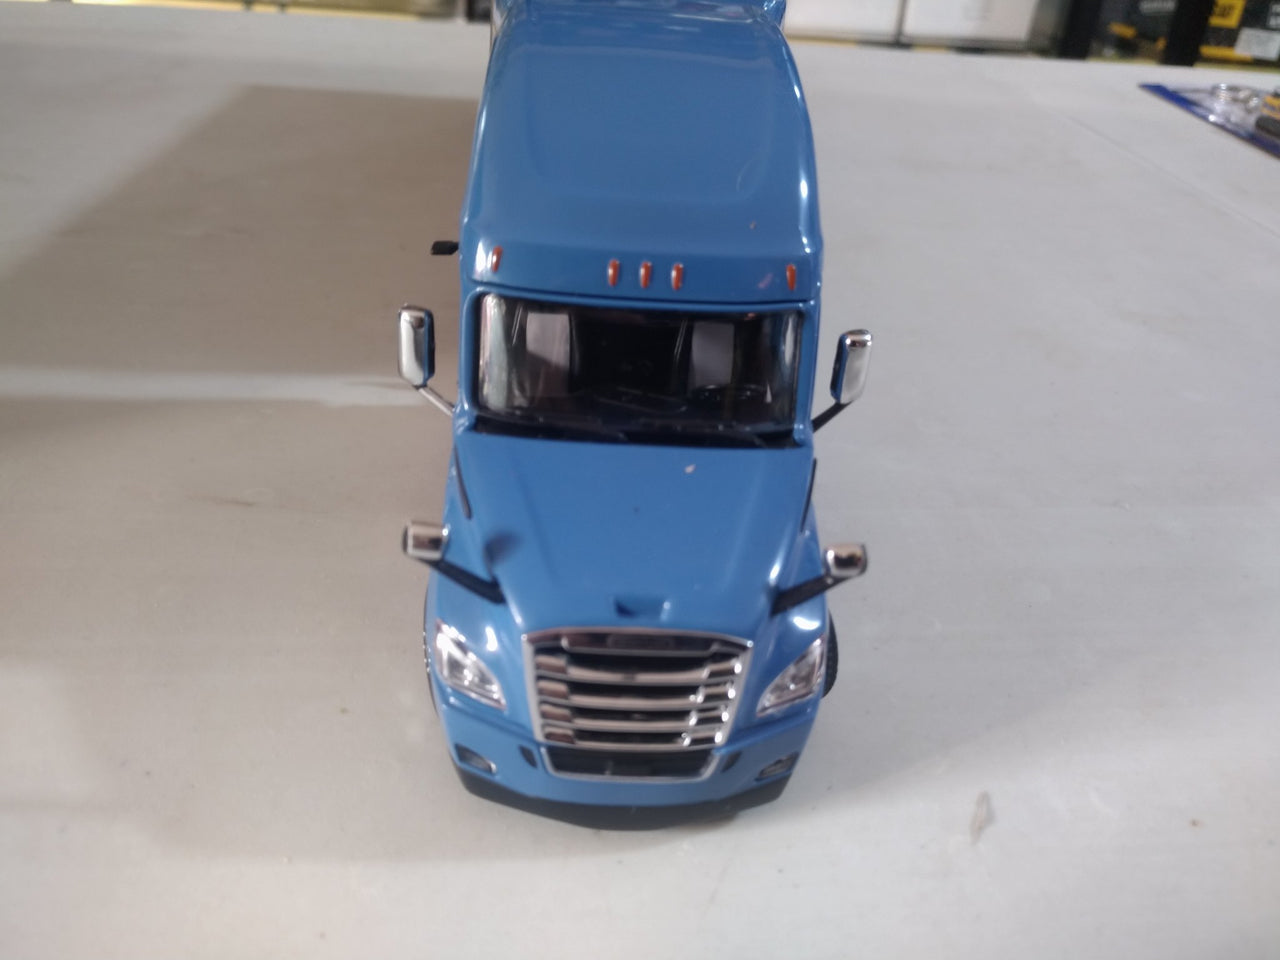 71048 Freightliner New Cascadia Trailer With Maersk Container Scale 1:50 (Discontinued Model)